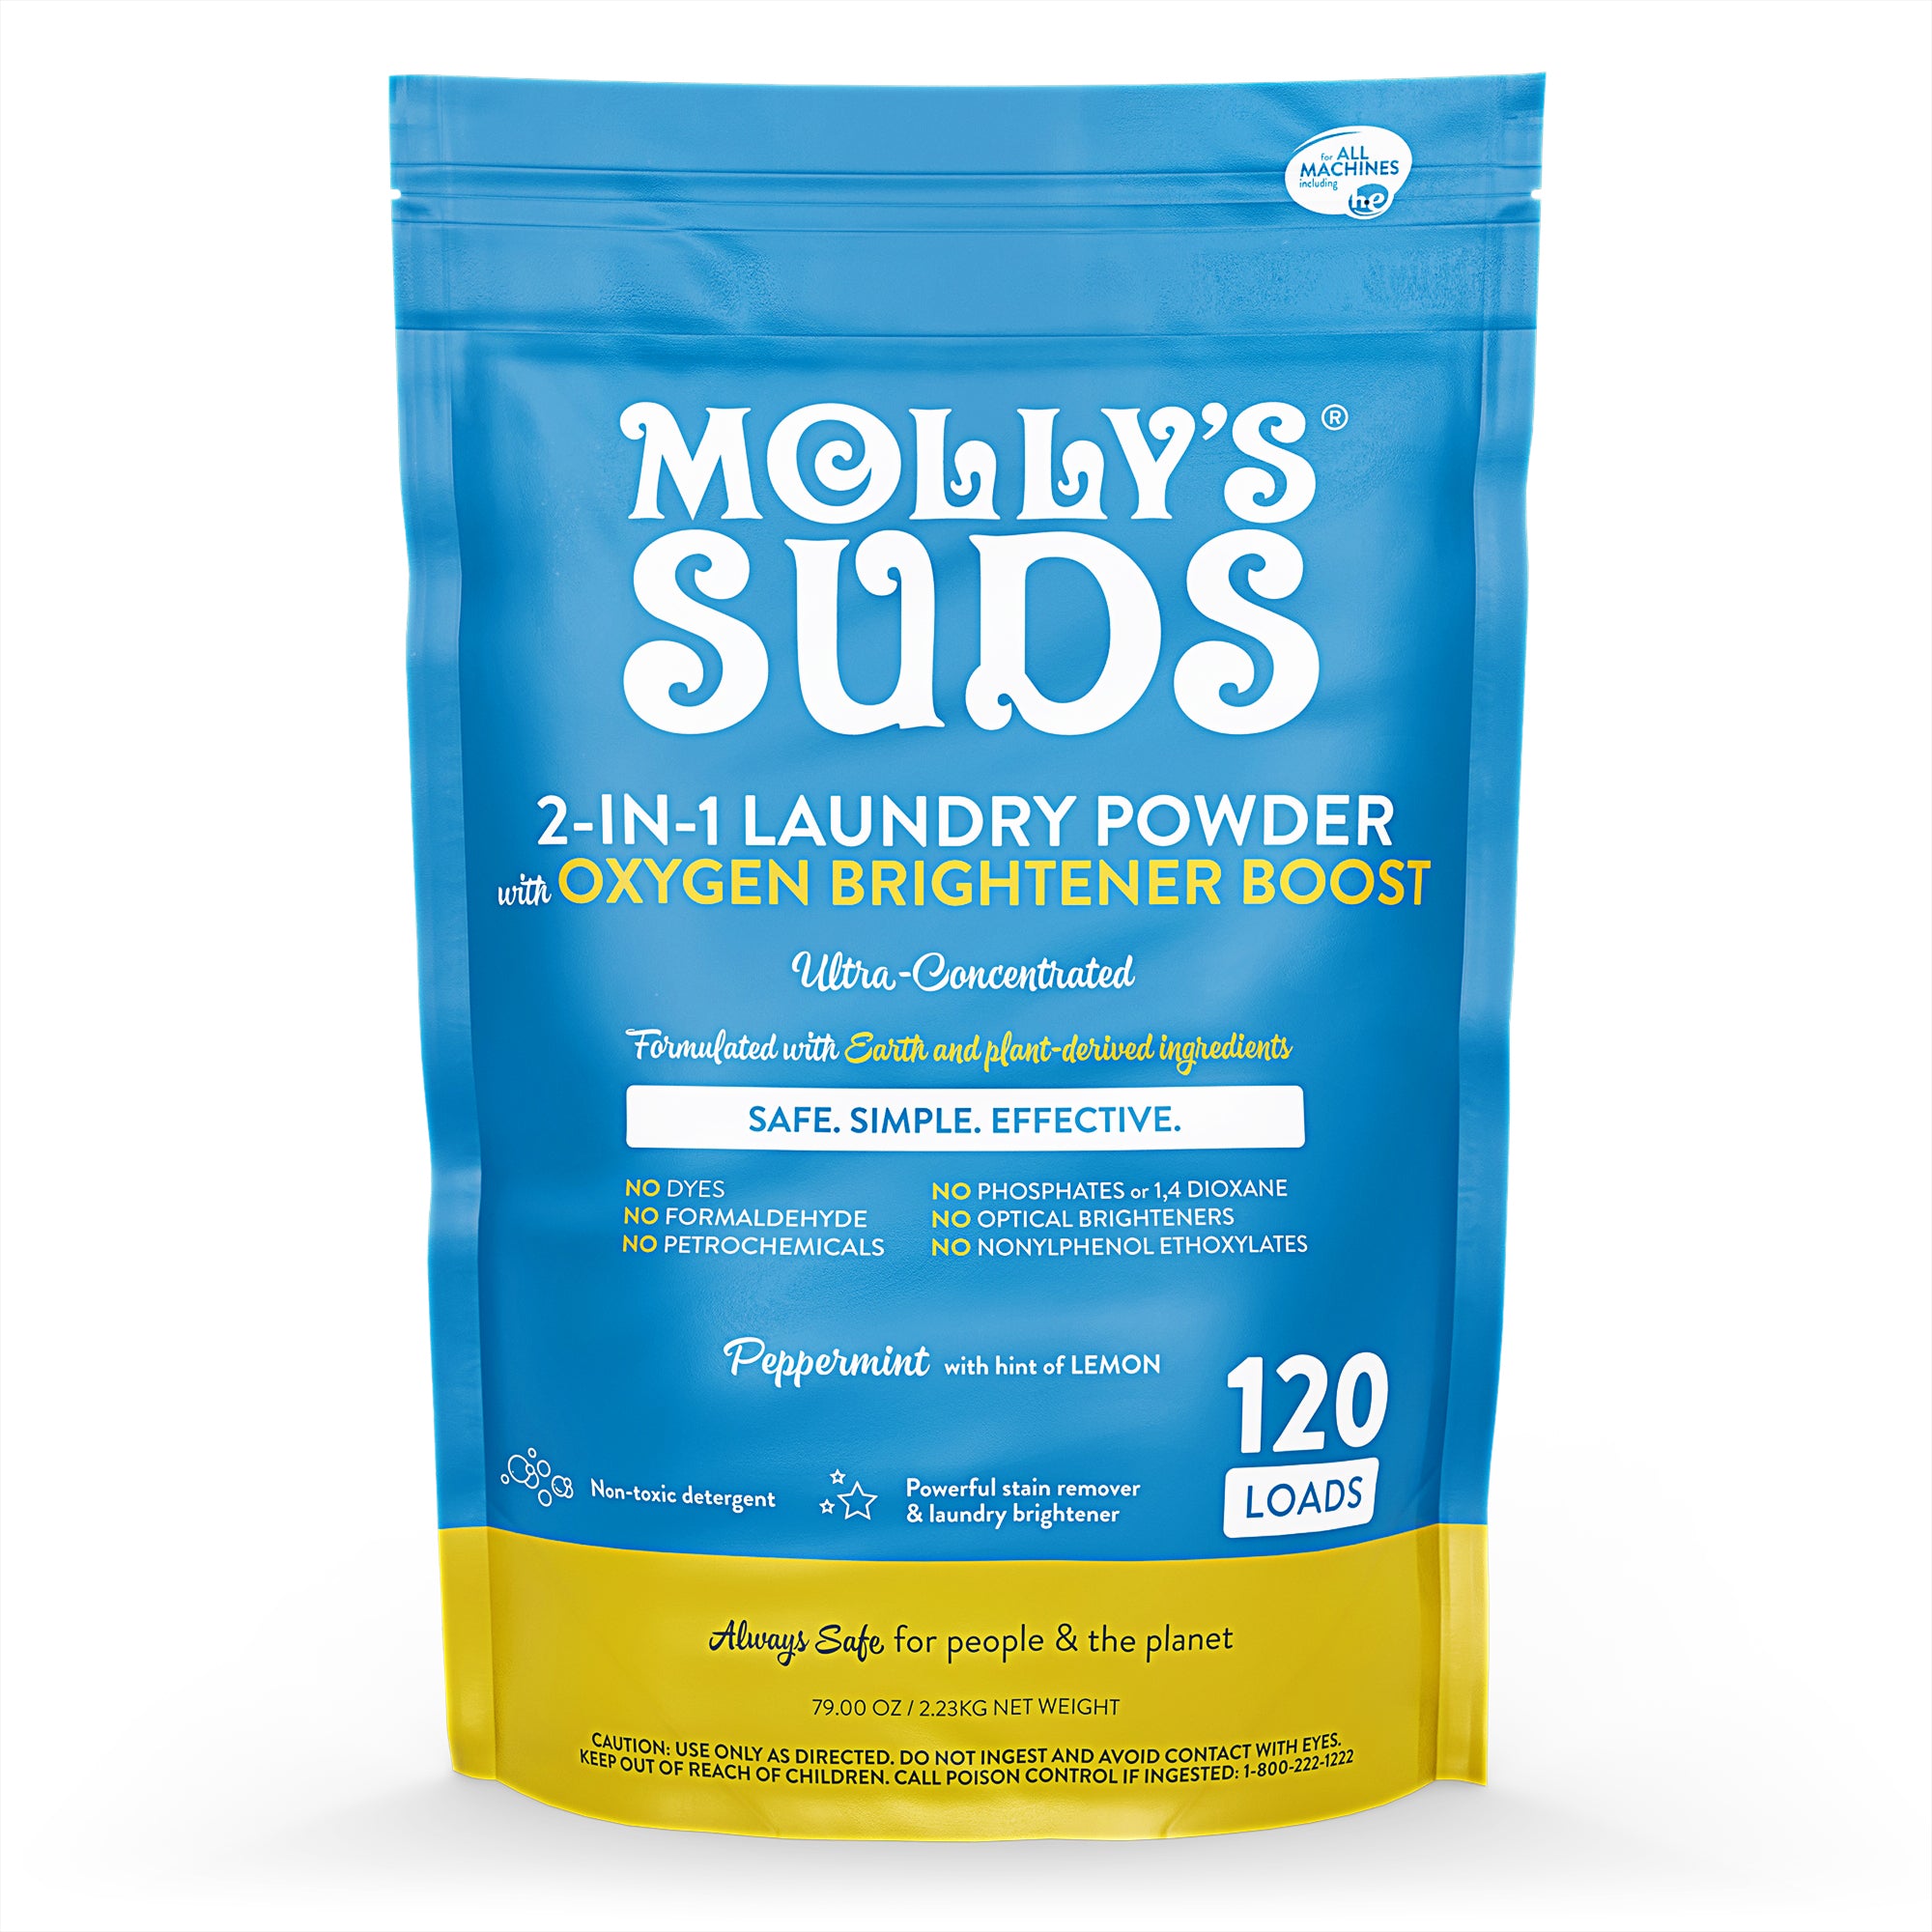 Molly's Suds Laundry Powder 120 Loads - Unscented